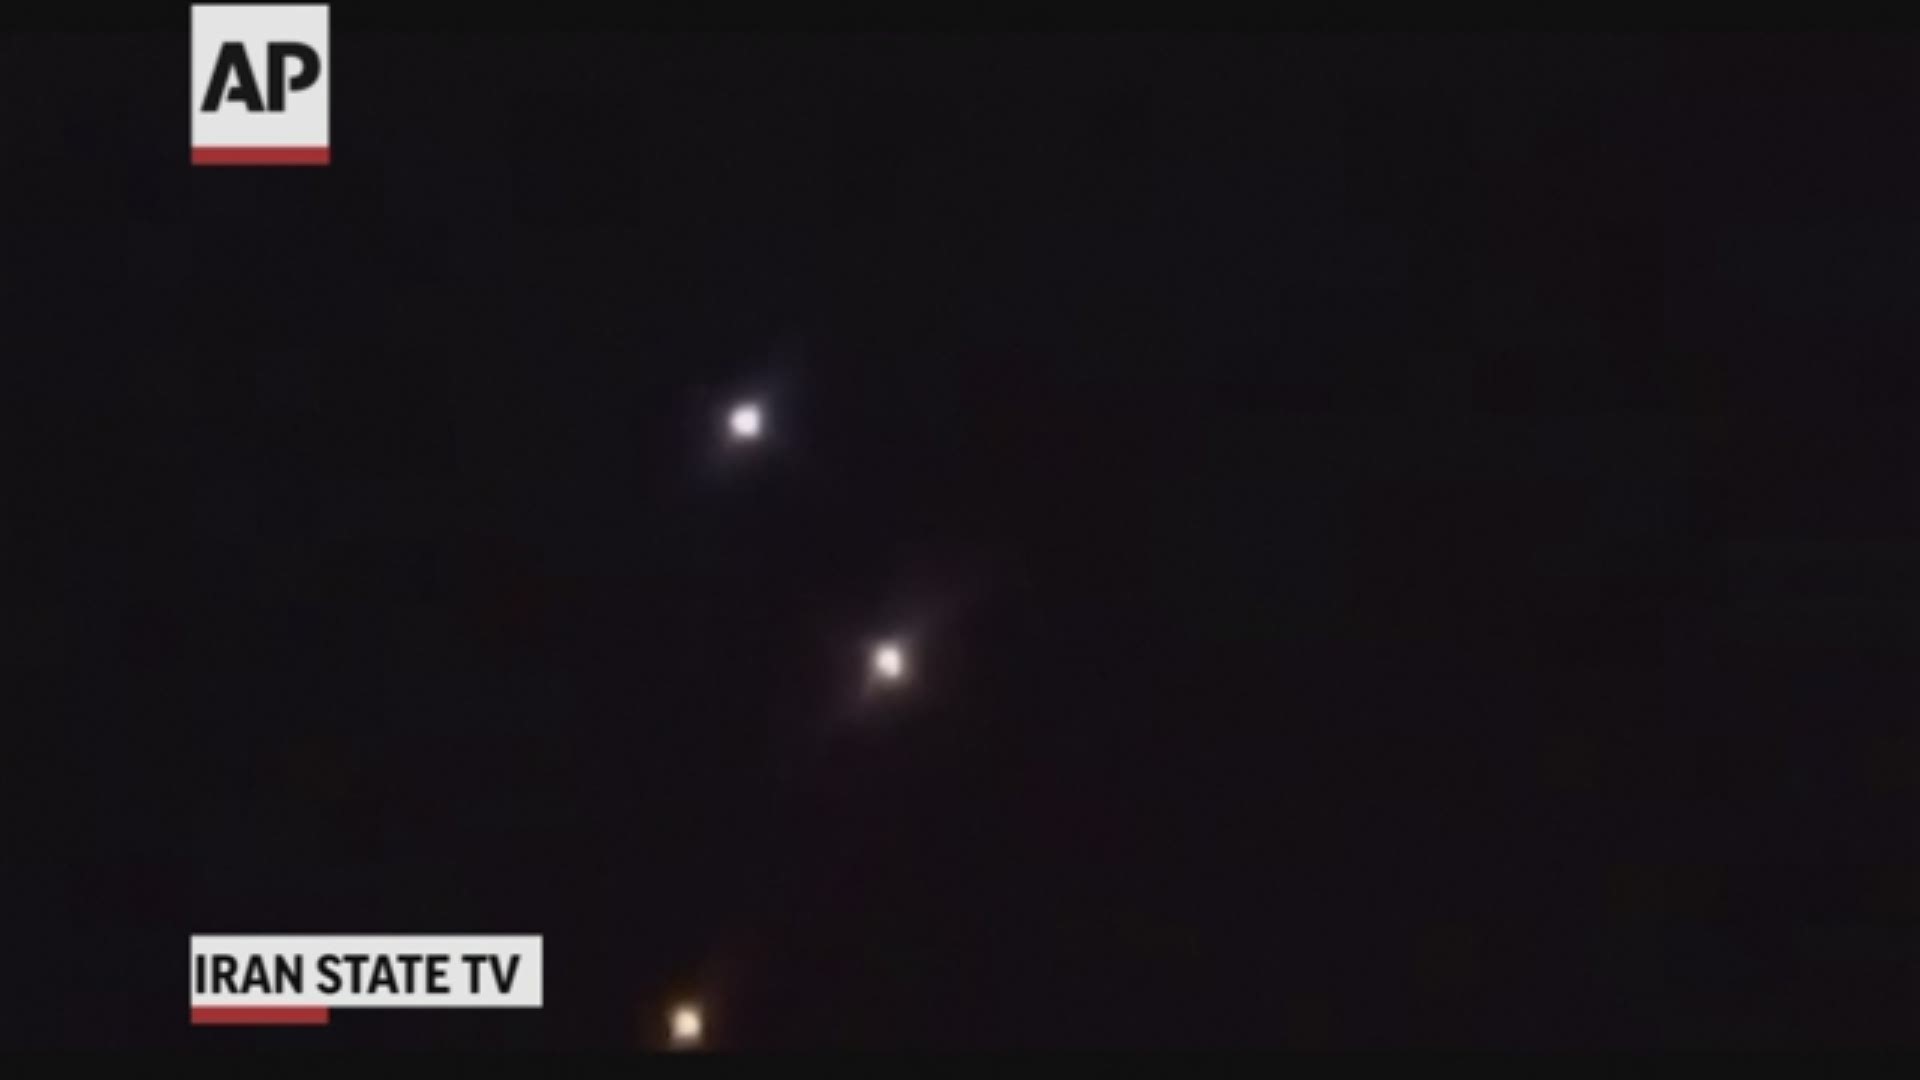 Iranian State TV released video of the launch of missiles against Iraqi bases that house U.S. forces on Jan. 8, 2020.